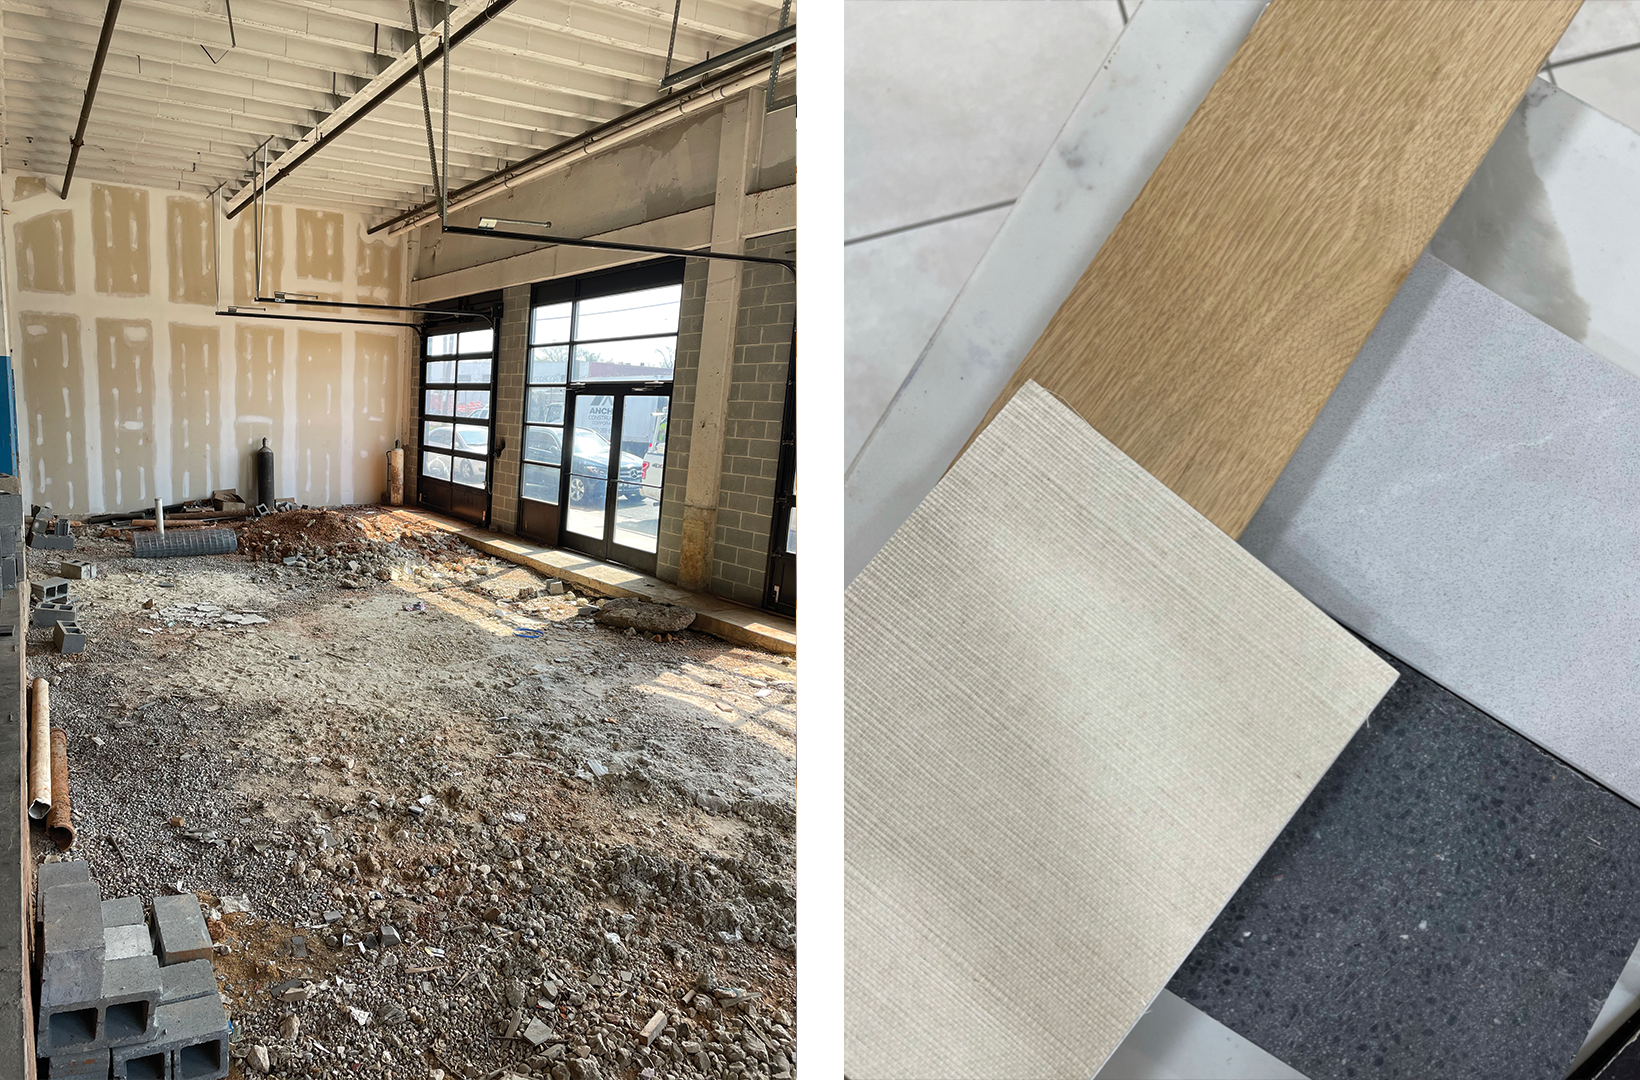 Left: The Appointed District Shop space under construction; Right: Materials sourced for the Appointed District Shop